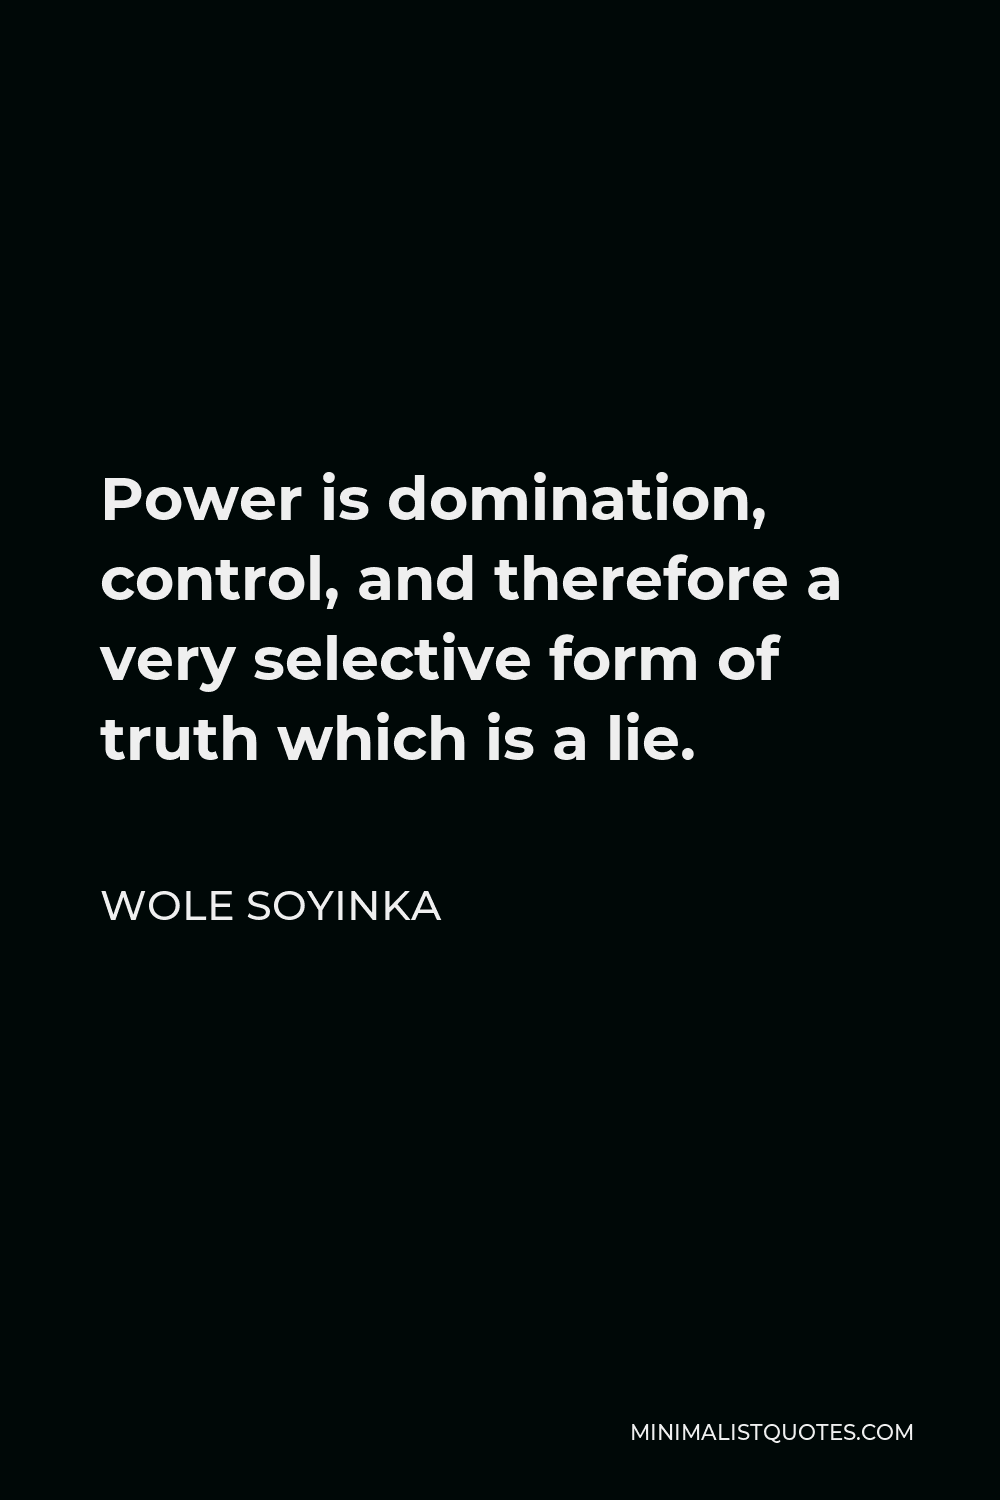 Wole Soyinka Quote - Power is domination, control, and therefore a very selective form of truth which is a lie.